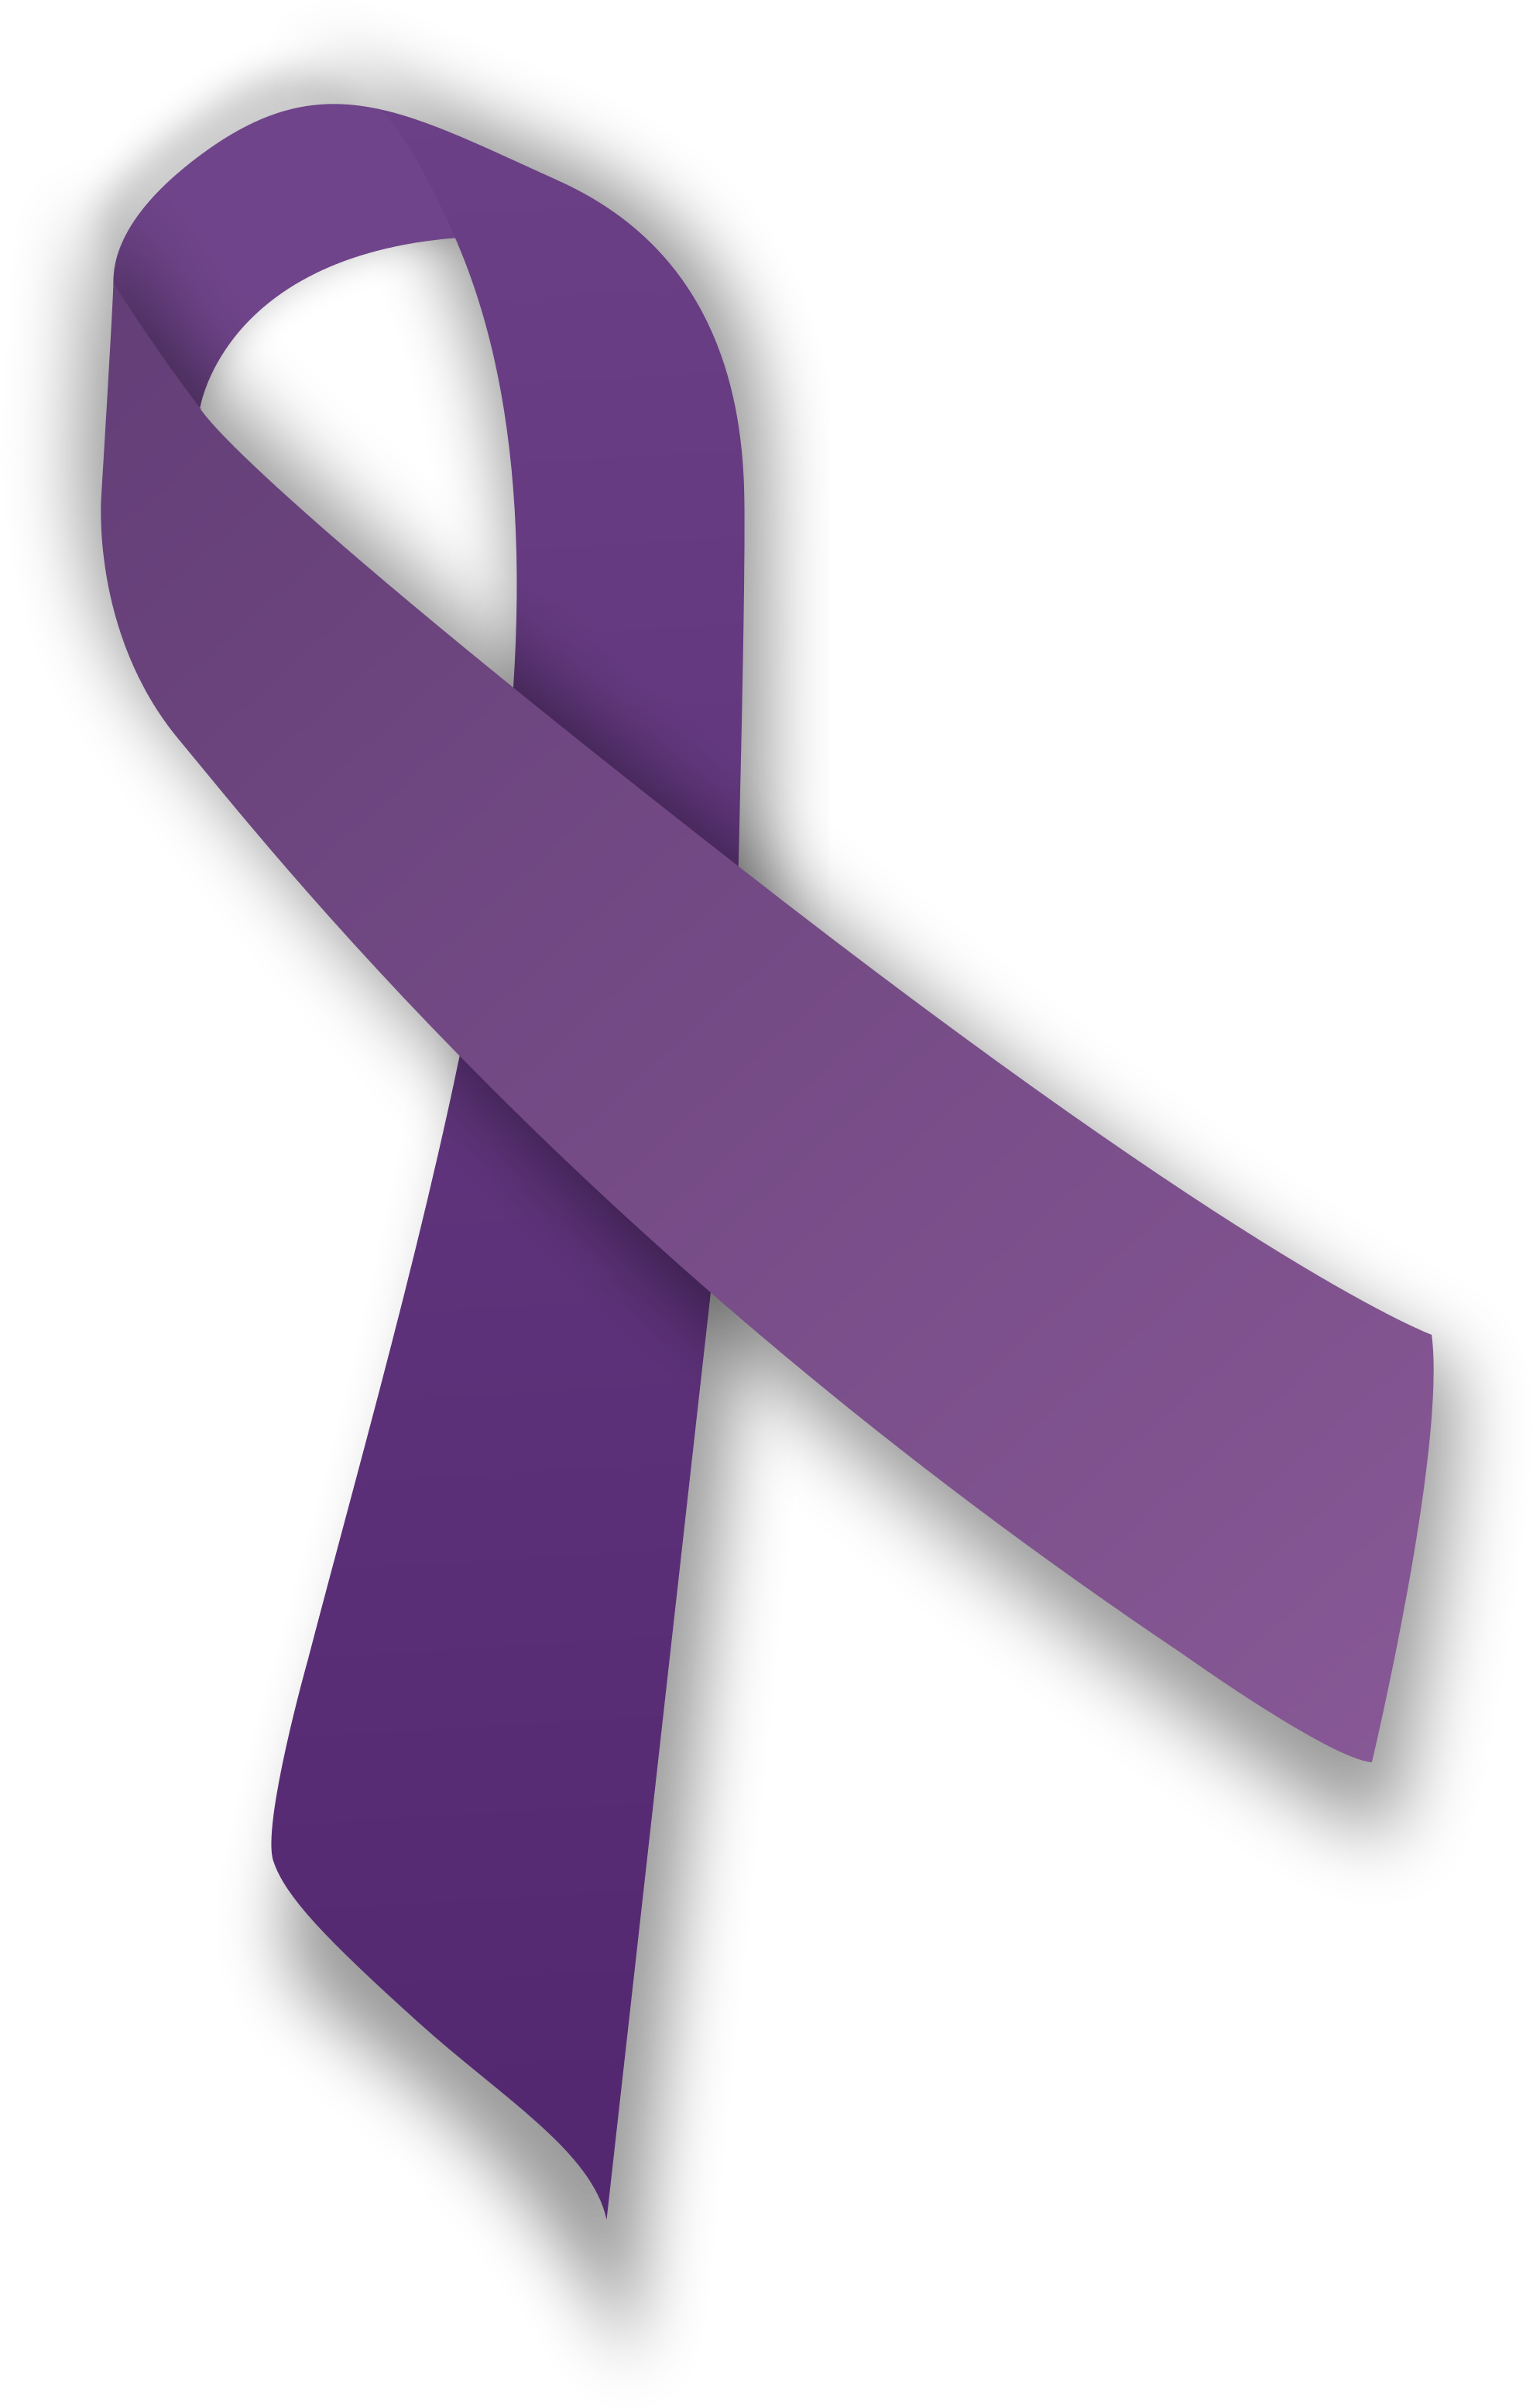 Wear Purple Today For Epilepsy Awareness Thebaynet - National Cancer Survivors Day Ribbon (2000x3135)